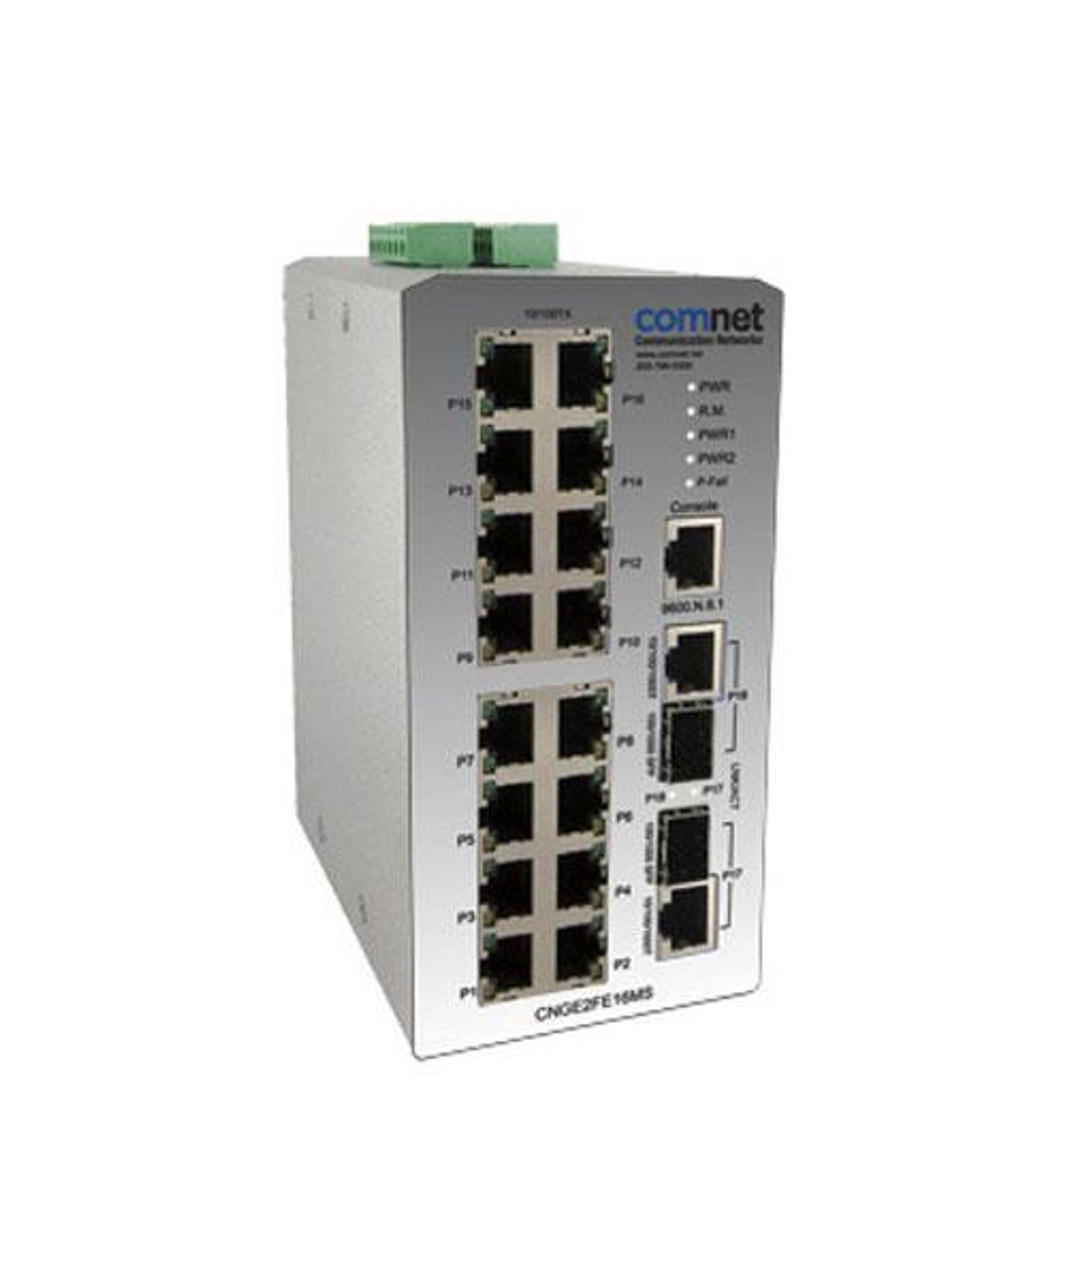 ComNet CNGE2FE16MS Ethernet Switch - 18 Ports - Manageable - Fast Ethernet Gigabit Ethernet - 10/100/1000Base-T 1000Base-FX - 2 Layer Supported -